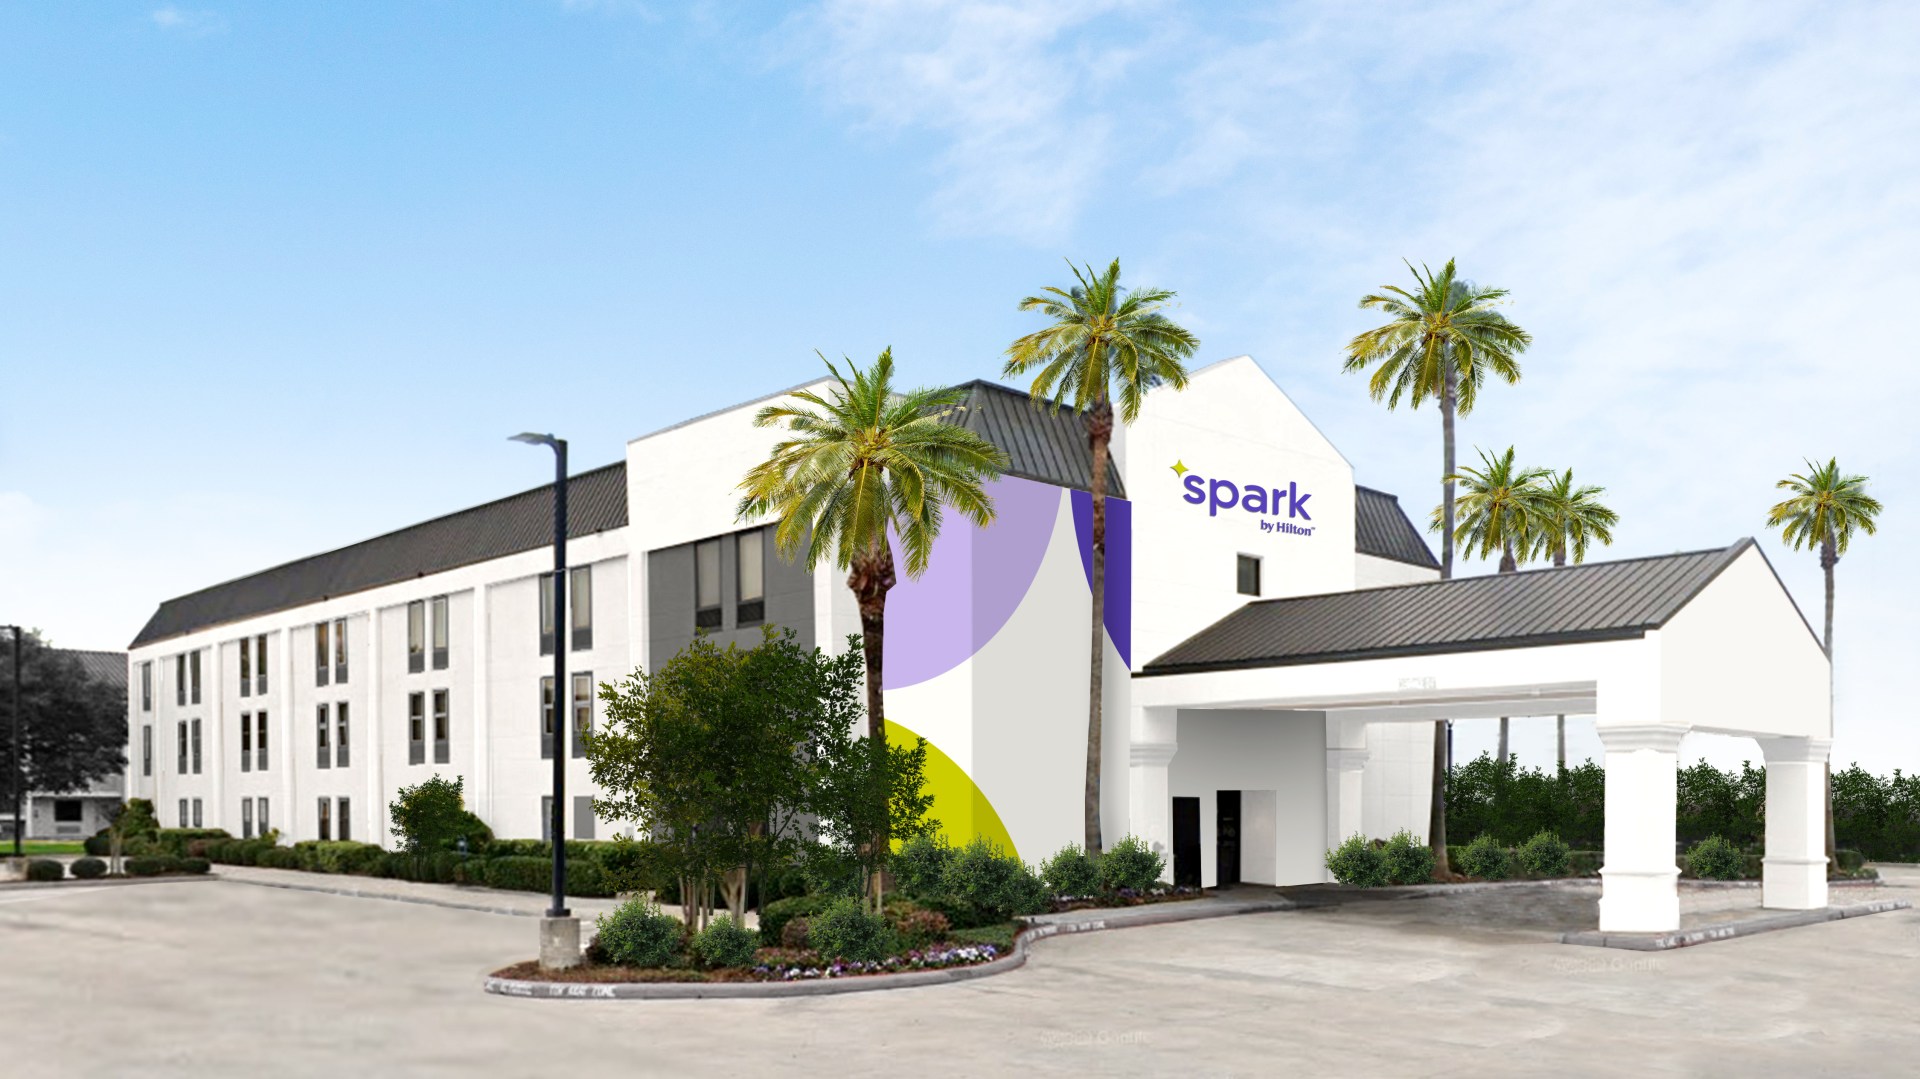 Spark by Hilton - Exterior rendering